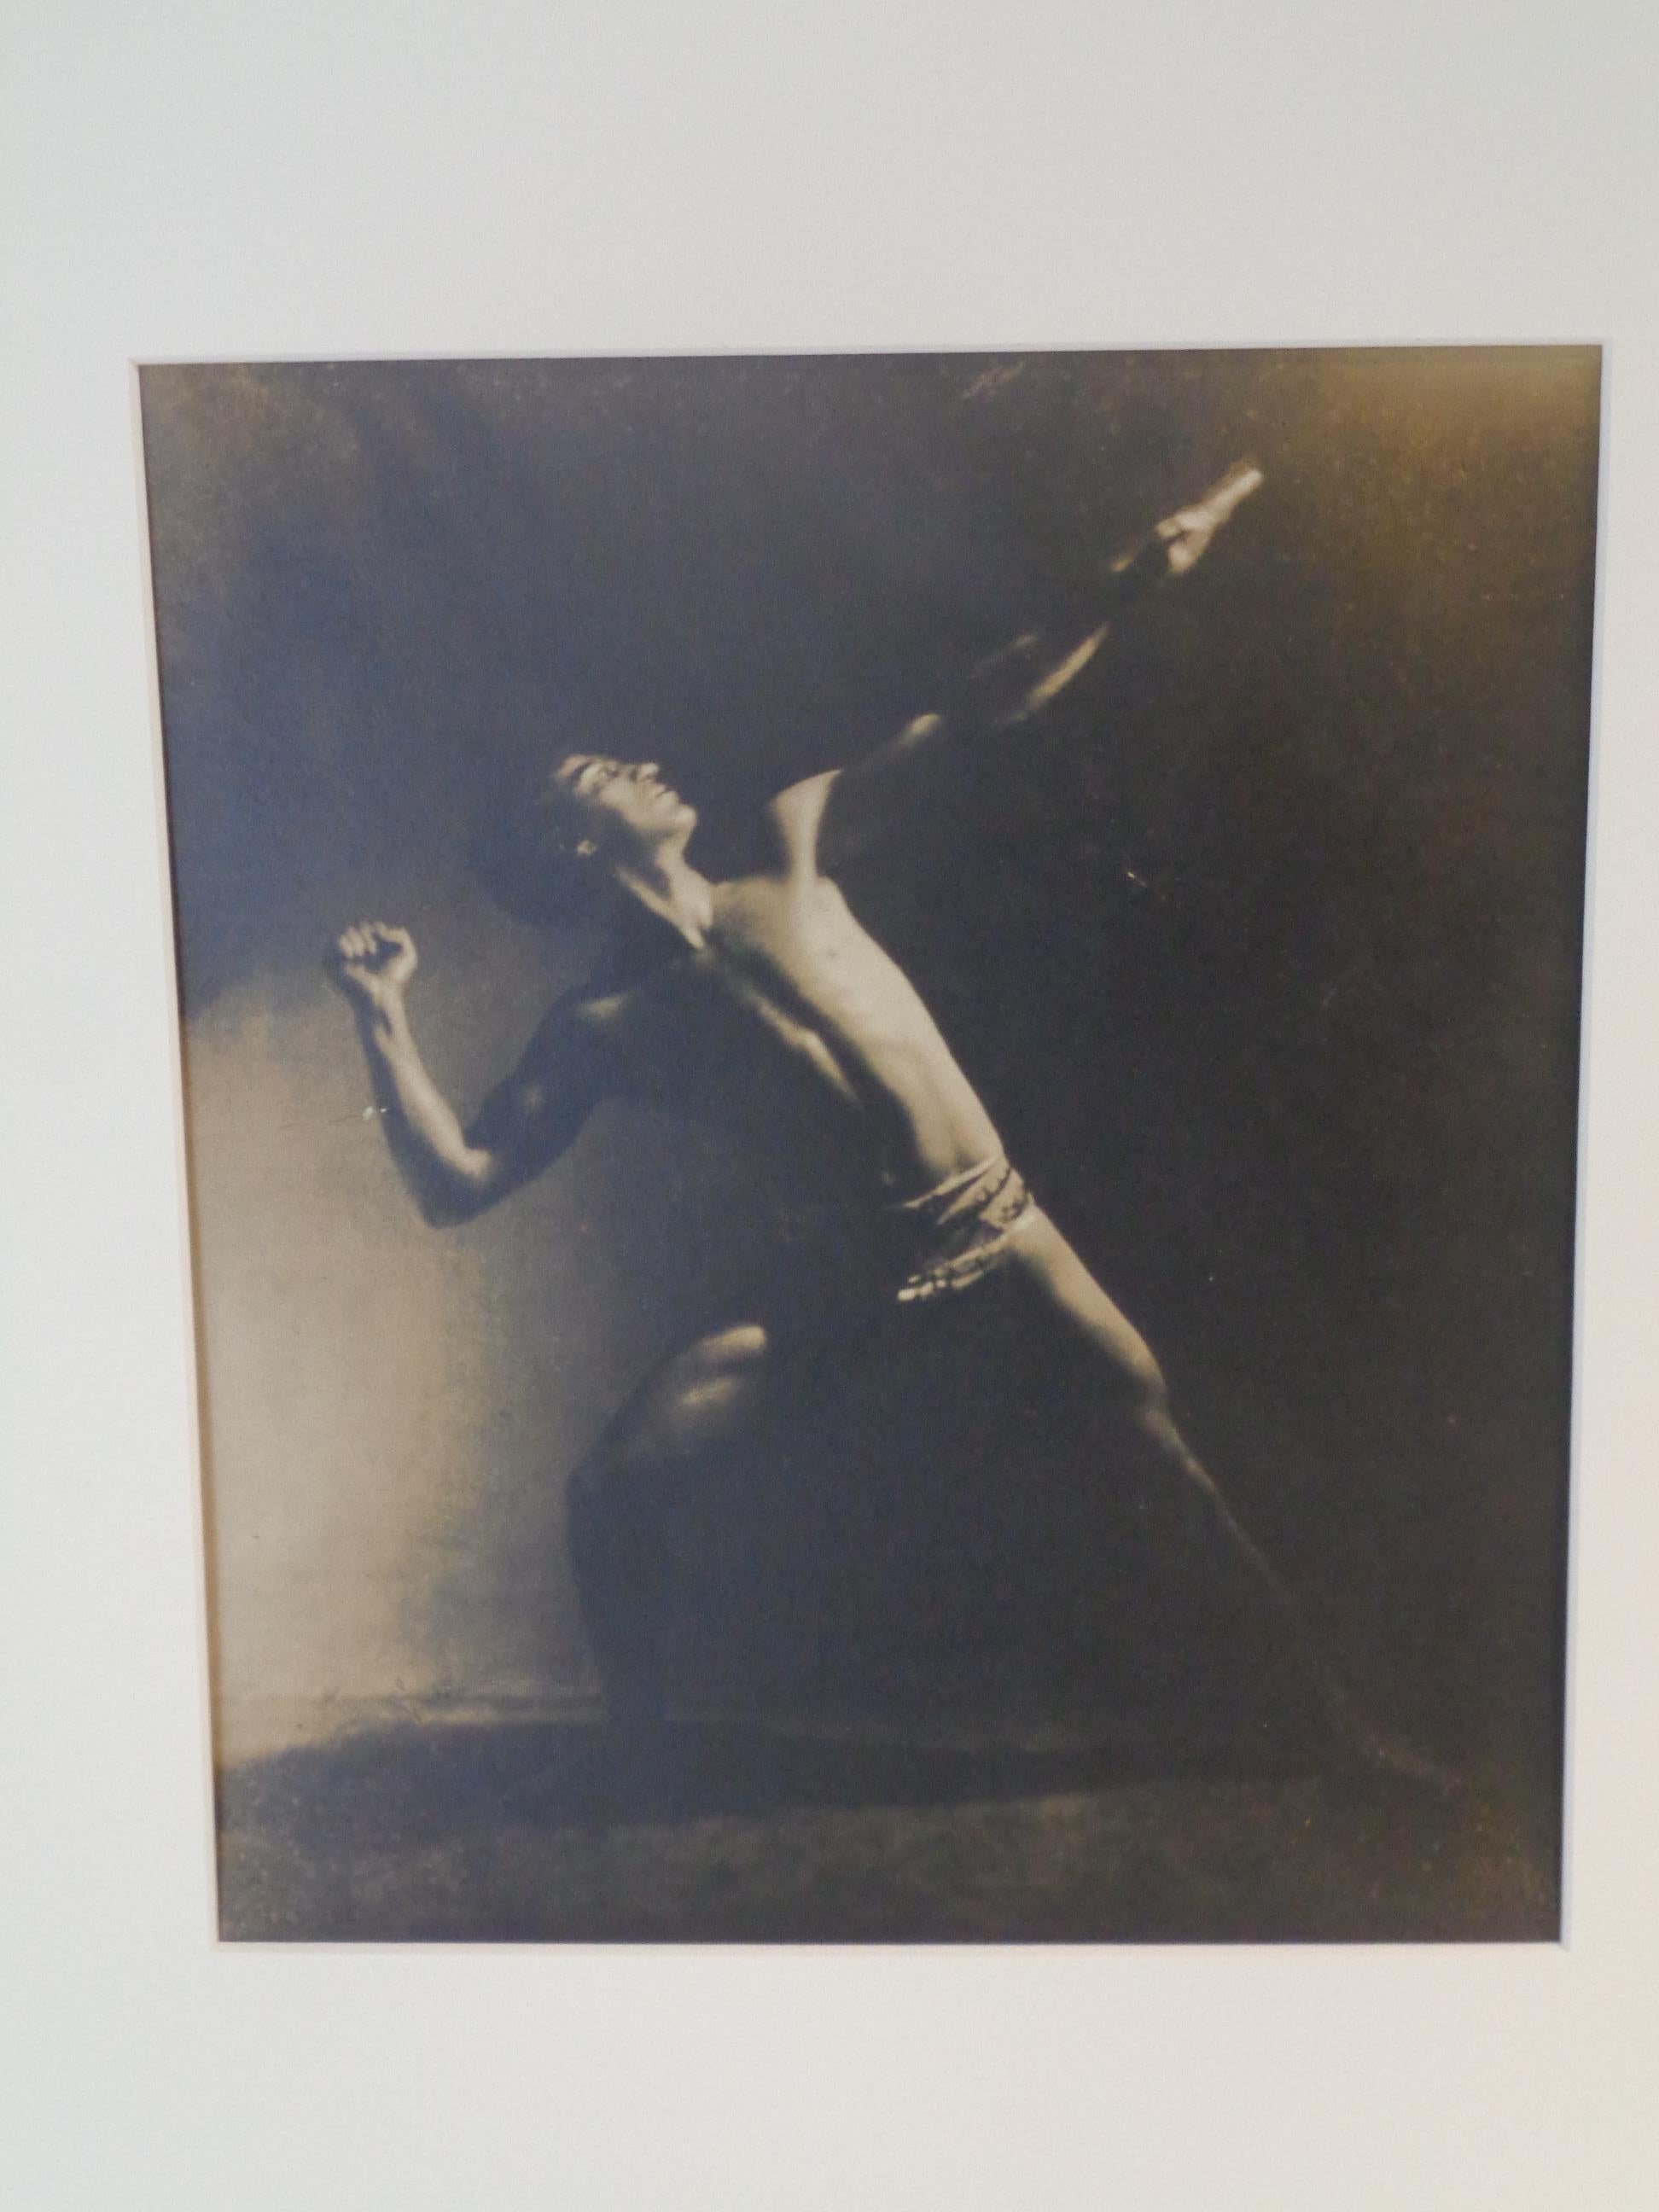 Original early pictorialist sepia tone gelatin silver print photograph of a theatrically posed partially clad muscular male nude by Rochester NY photographer Ned Hungerford. Circa 1900-1910. Mat size 20